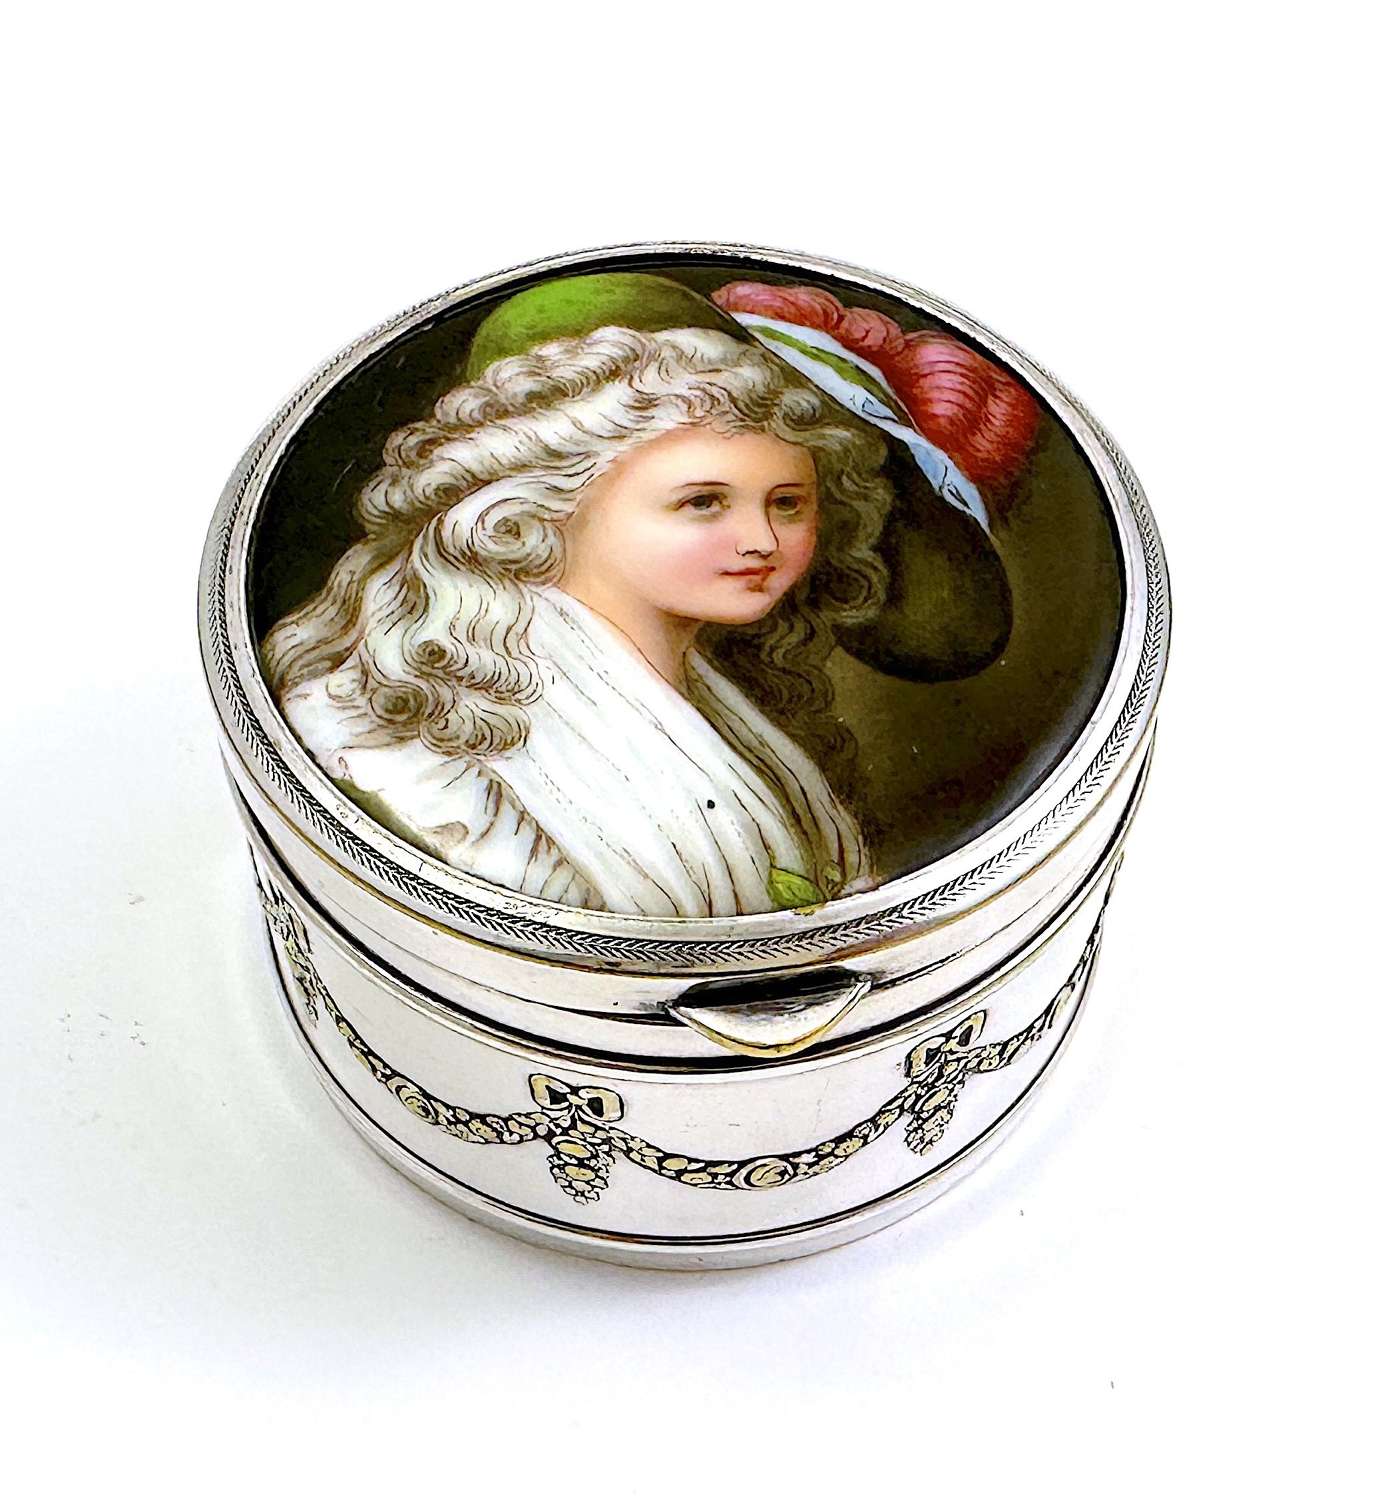 Antique WMF Jewellery Box with Porcelain Lid of Marie Antionette